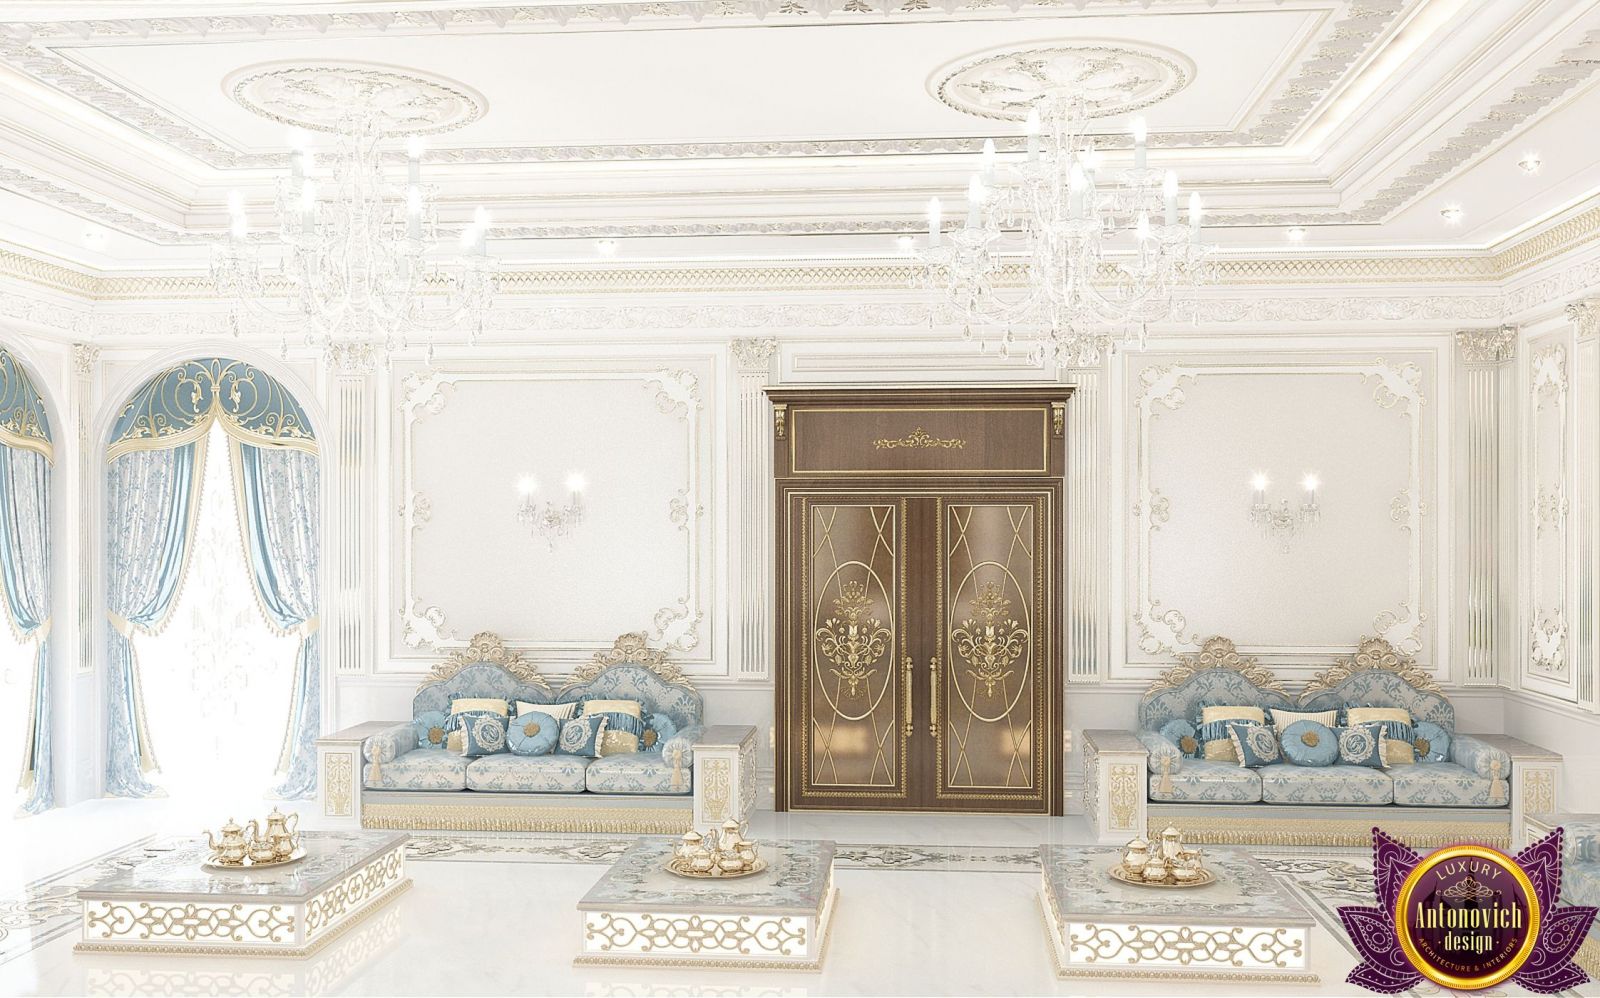 Traditional Majlis with intricate patterns and rich colors